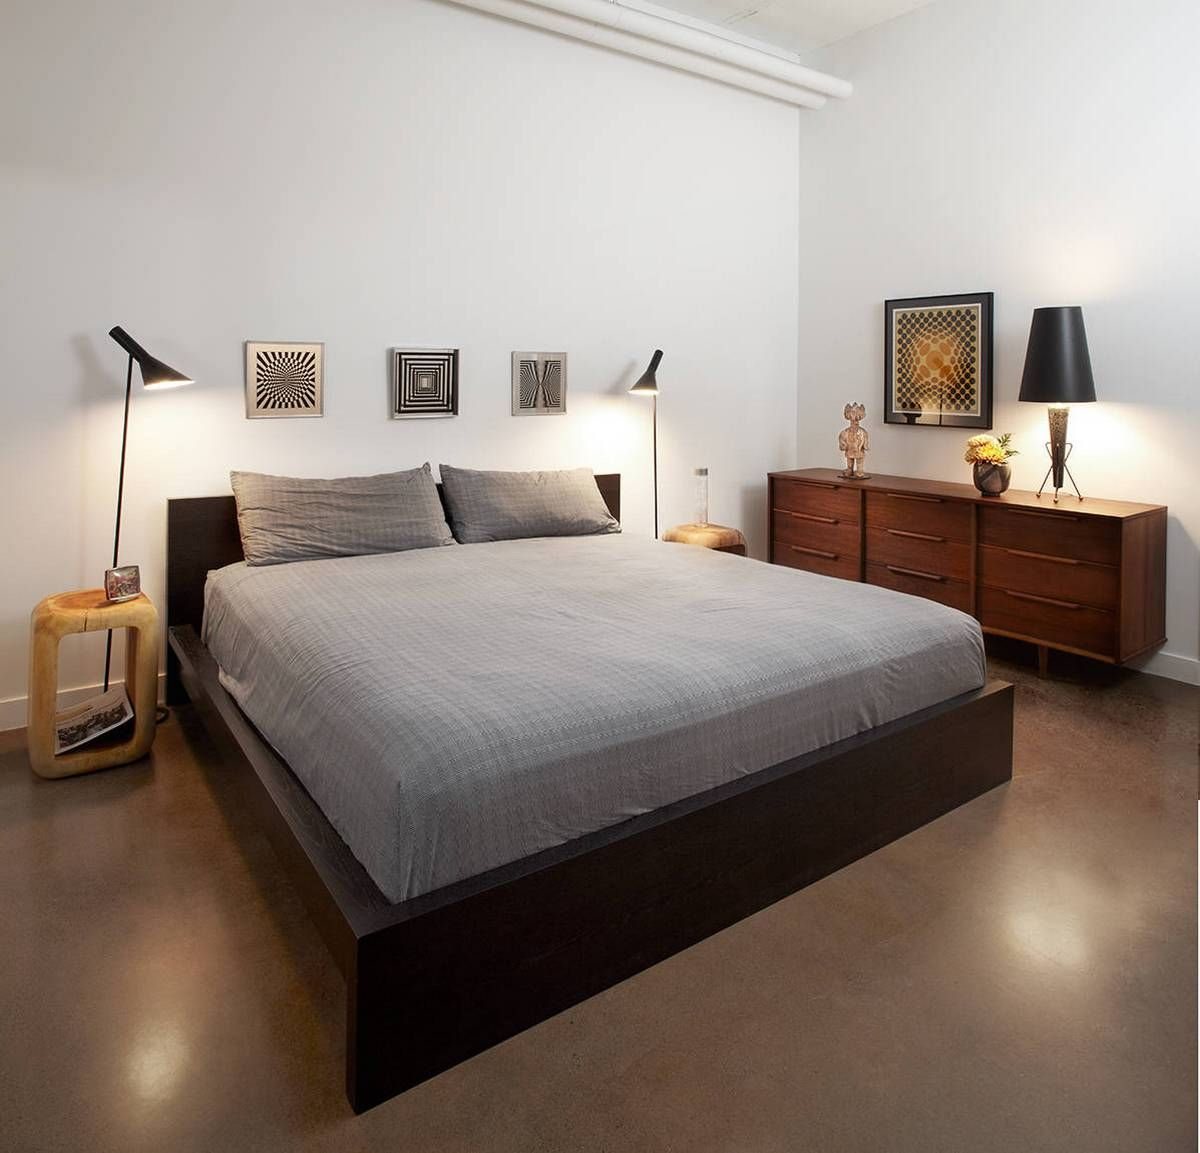 Standing Lamps Next To Bed Usual House Bedroom Loft with regard to dimensions 1200 X 1153